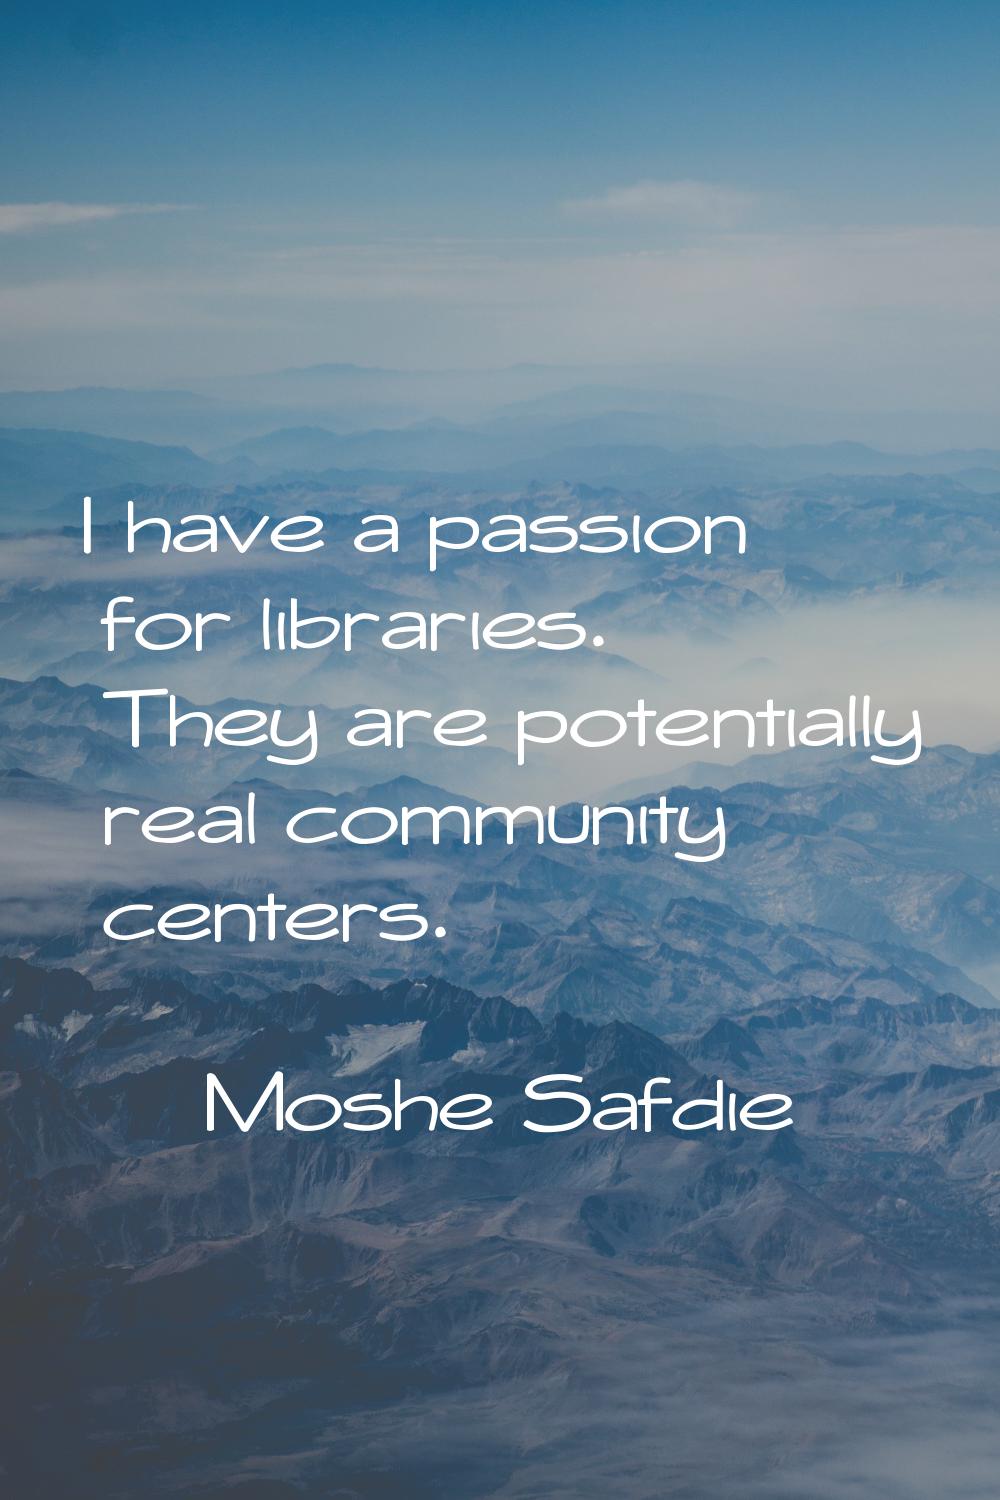 I have a passion for libraries. They are potentially real community centers.